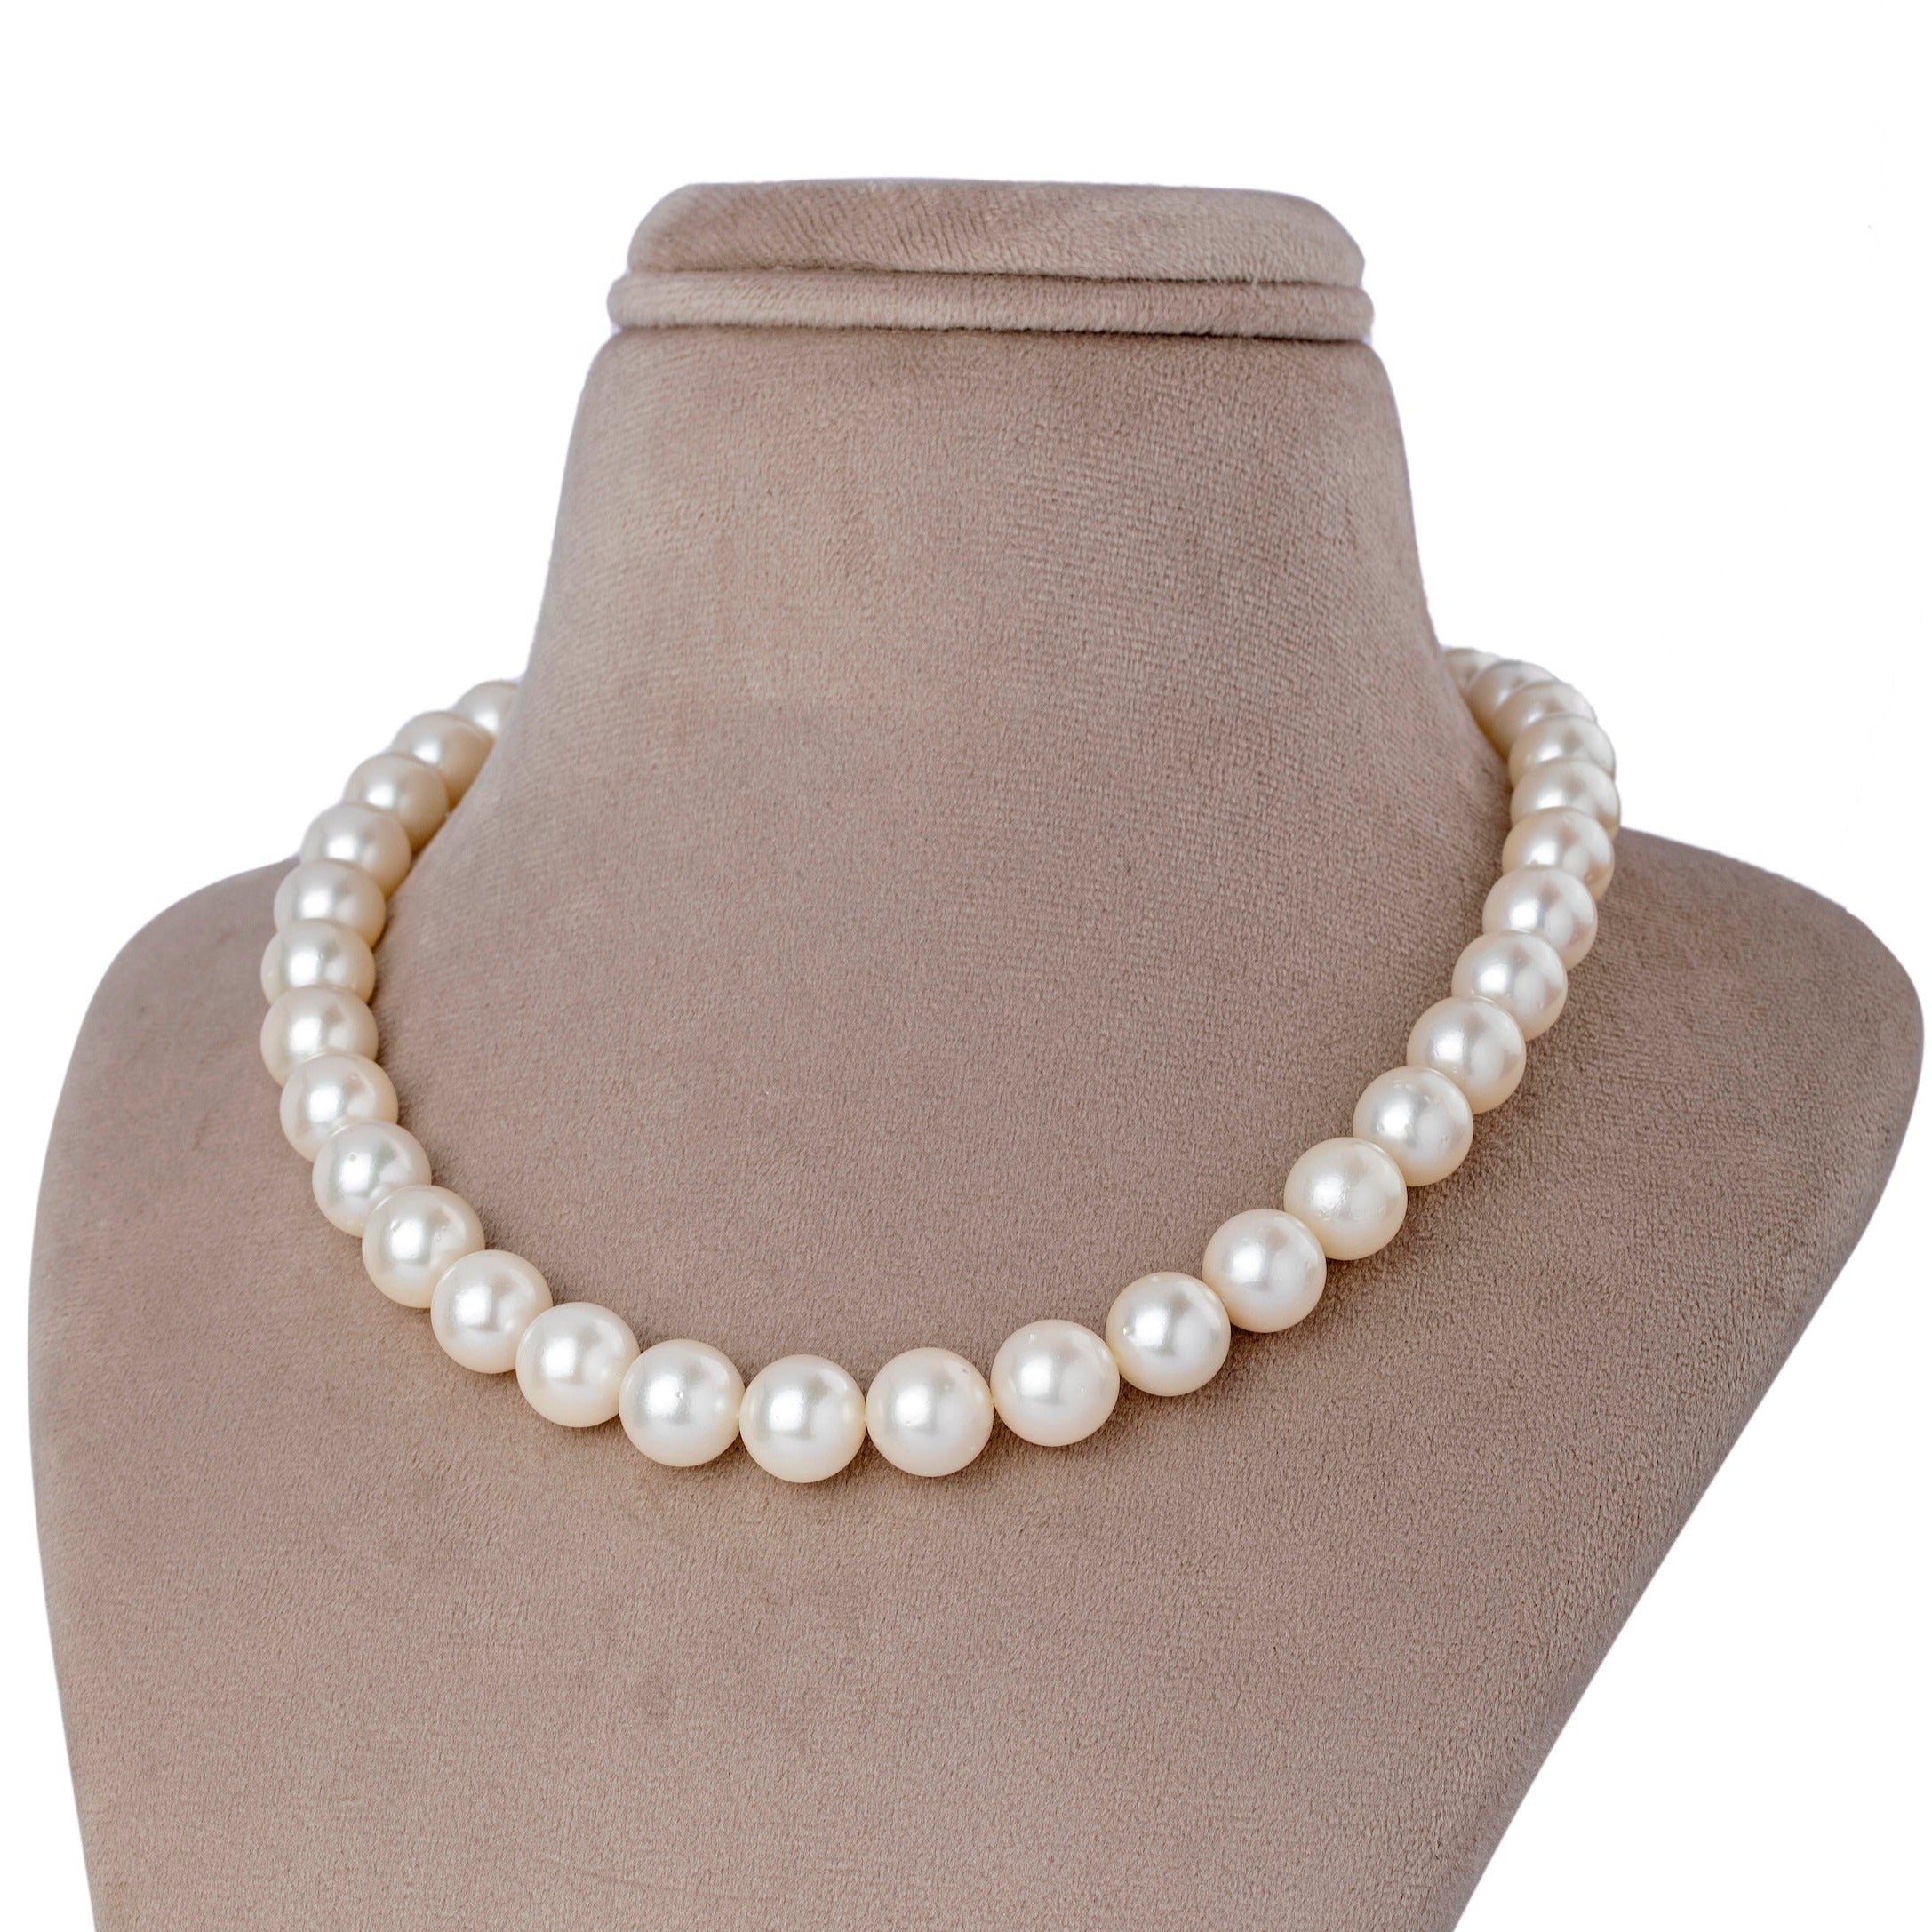 Ivory Radiance South Sea Pearl Necklace